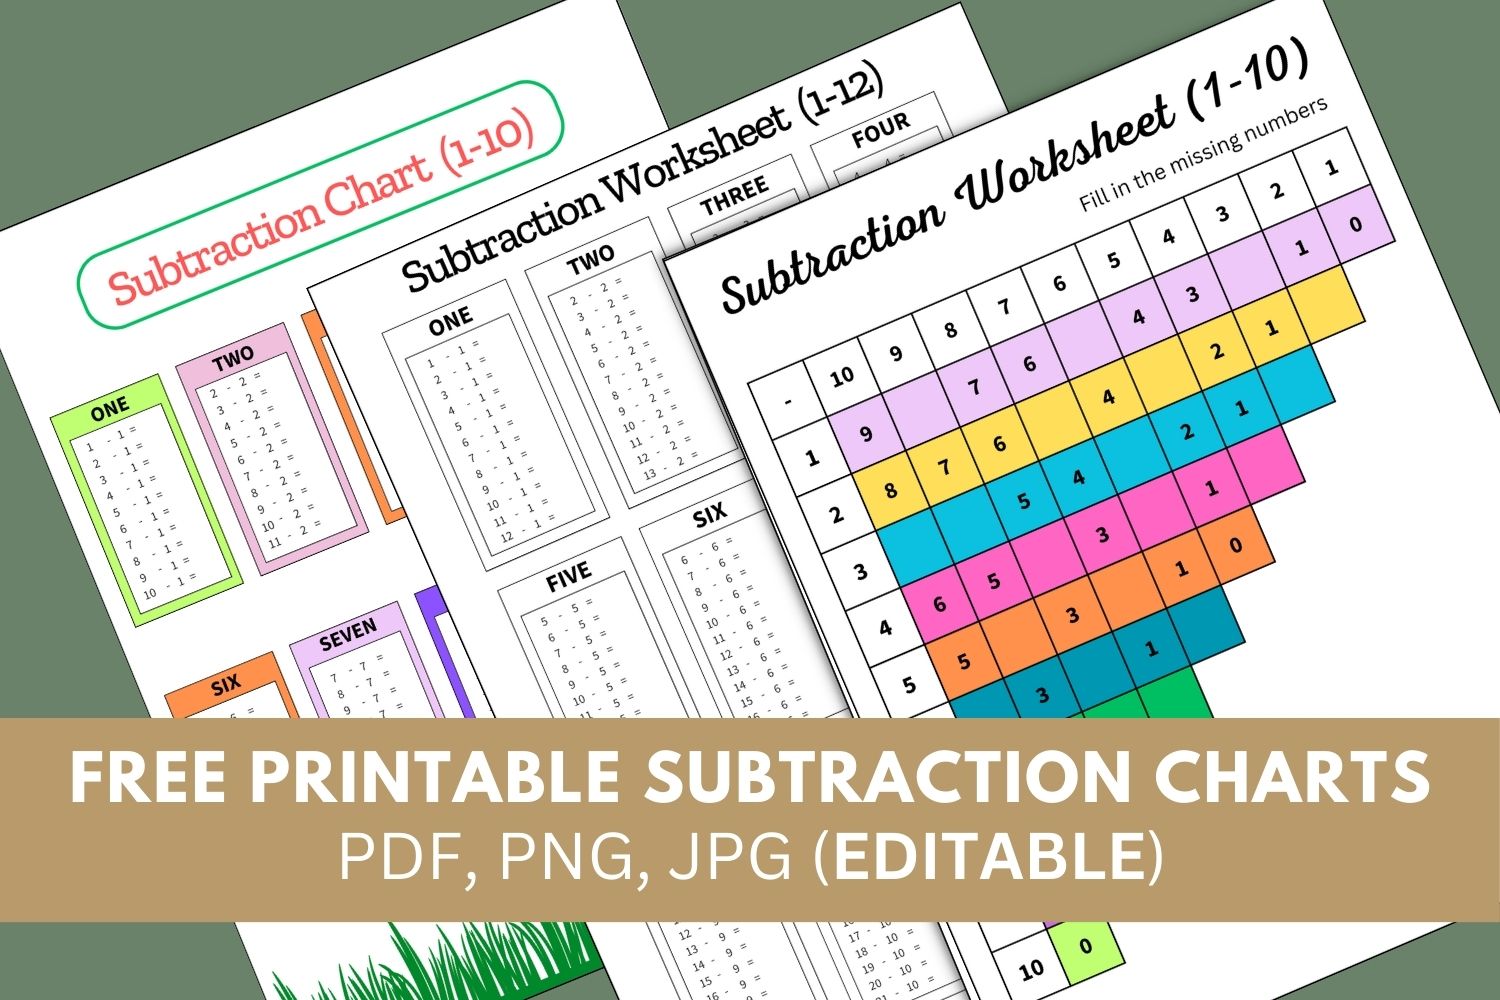 Subtraction Tables, Chart, Worksheets (1-10) (1-12). Colored, Black and White, Portrait orientation. Colored. Free printable subtraction chart, math table worksheets, sheet, pdf, blank, empty, kindergarten, 1st grade, 2nd grade, 3rd grade, template, print, download, online.